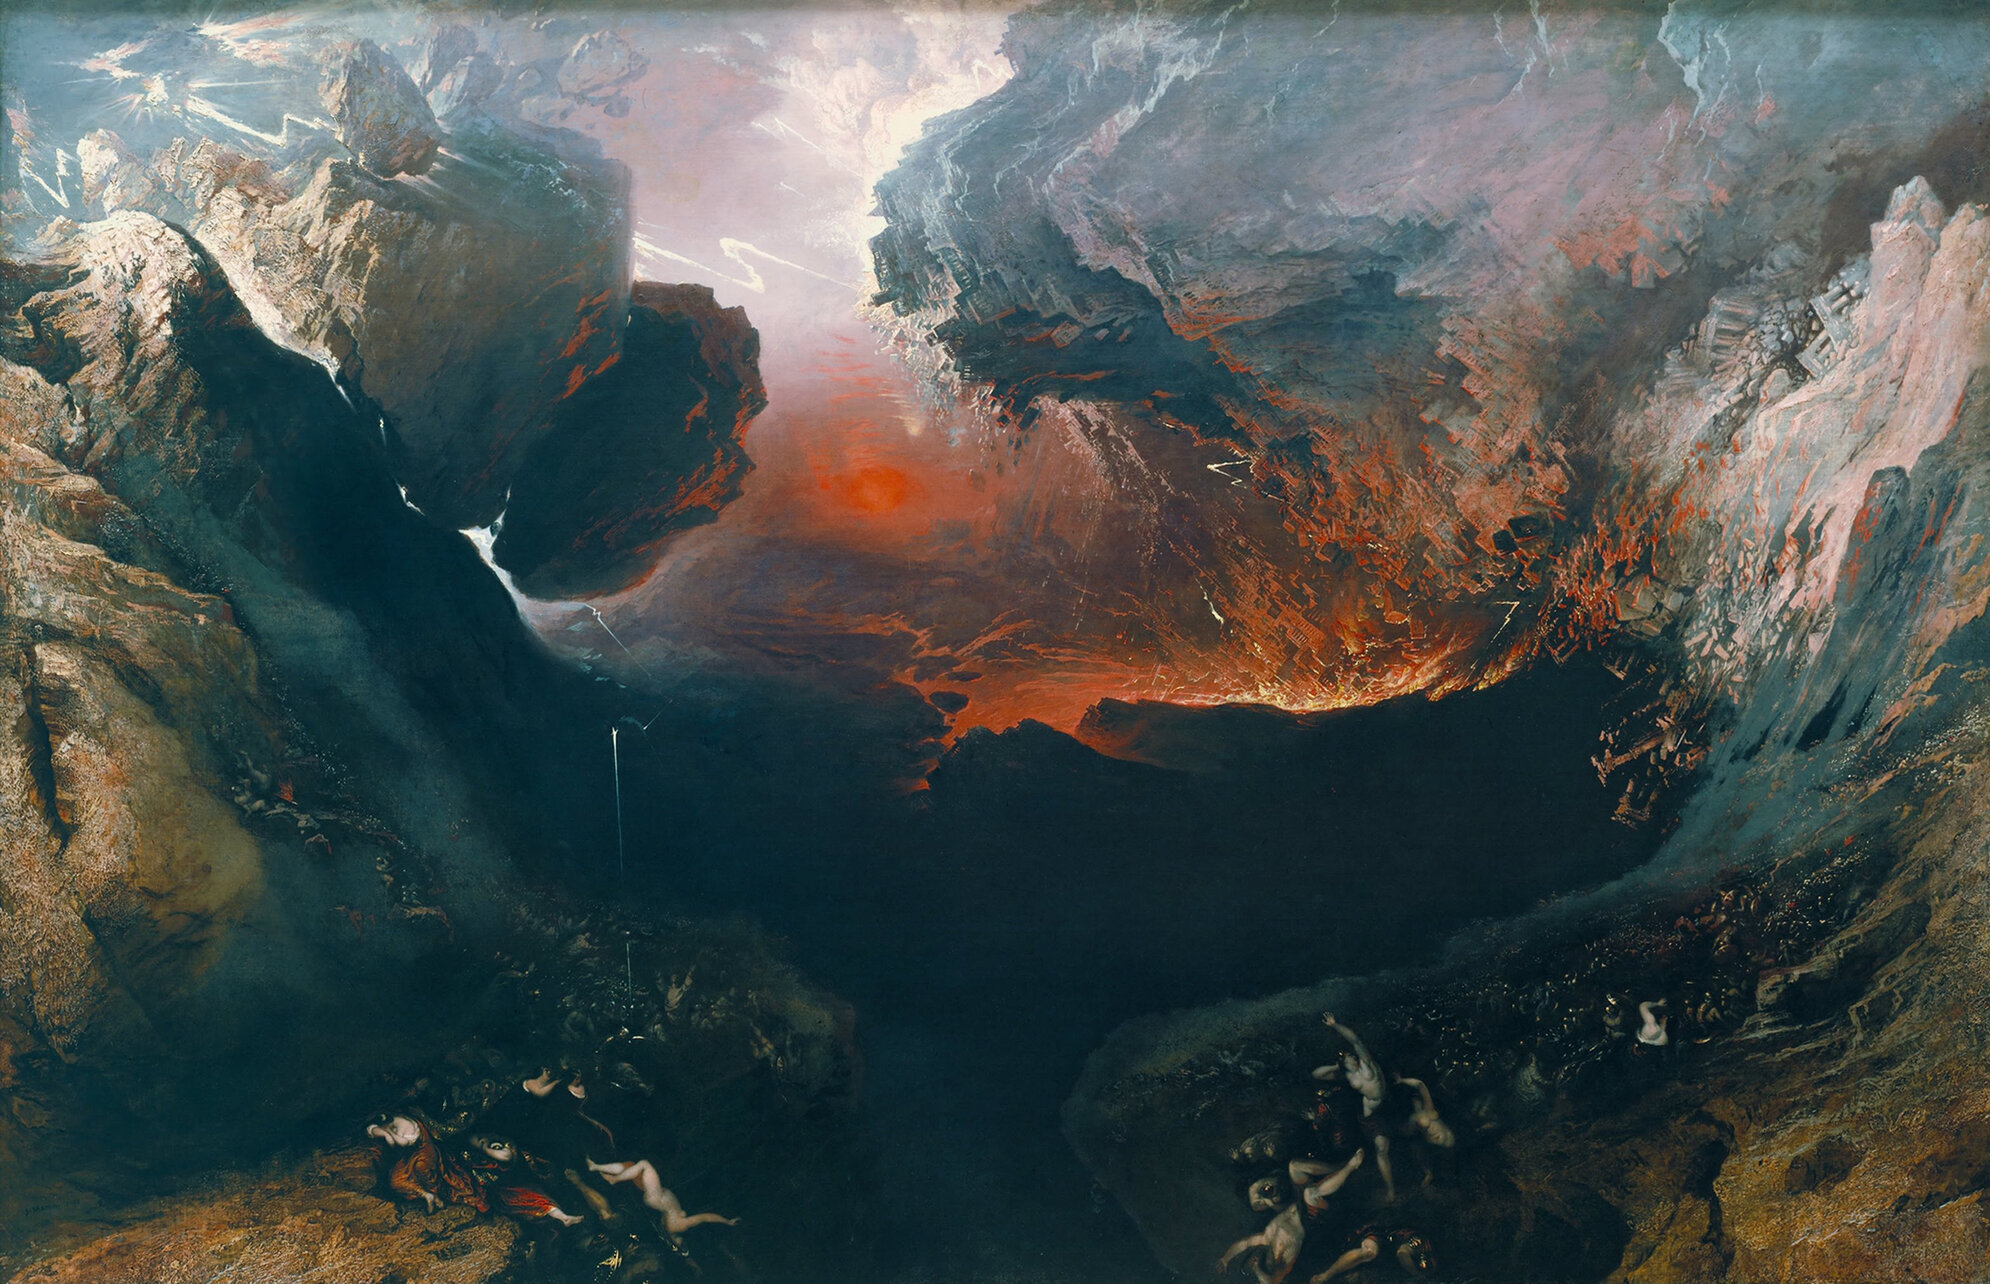 John Martin's painting The Great Day of His Wrath from c. 1851